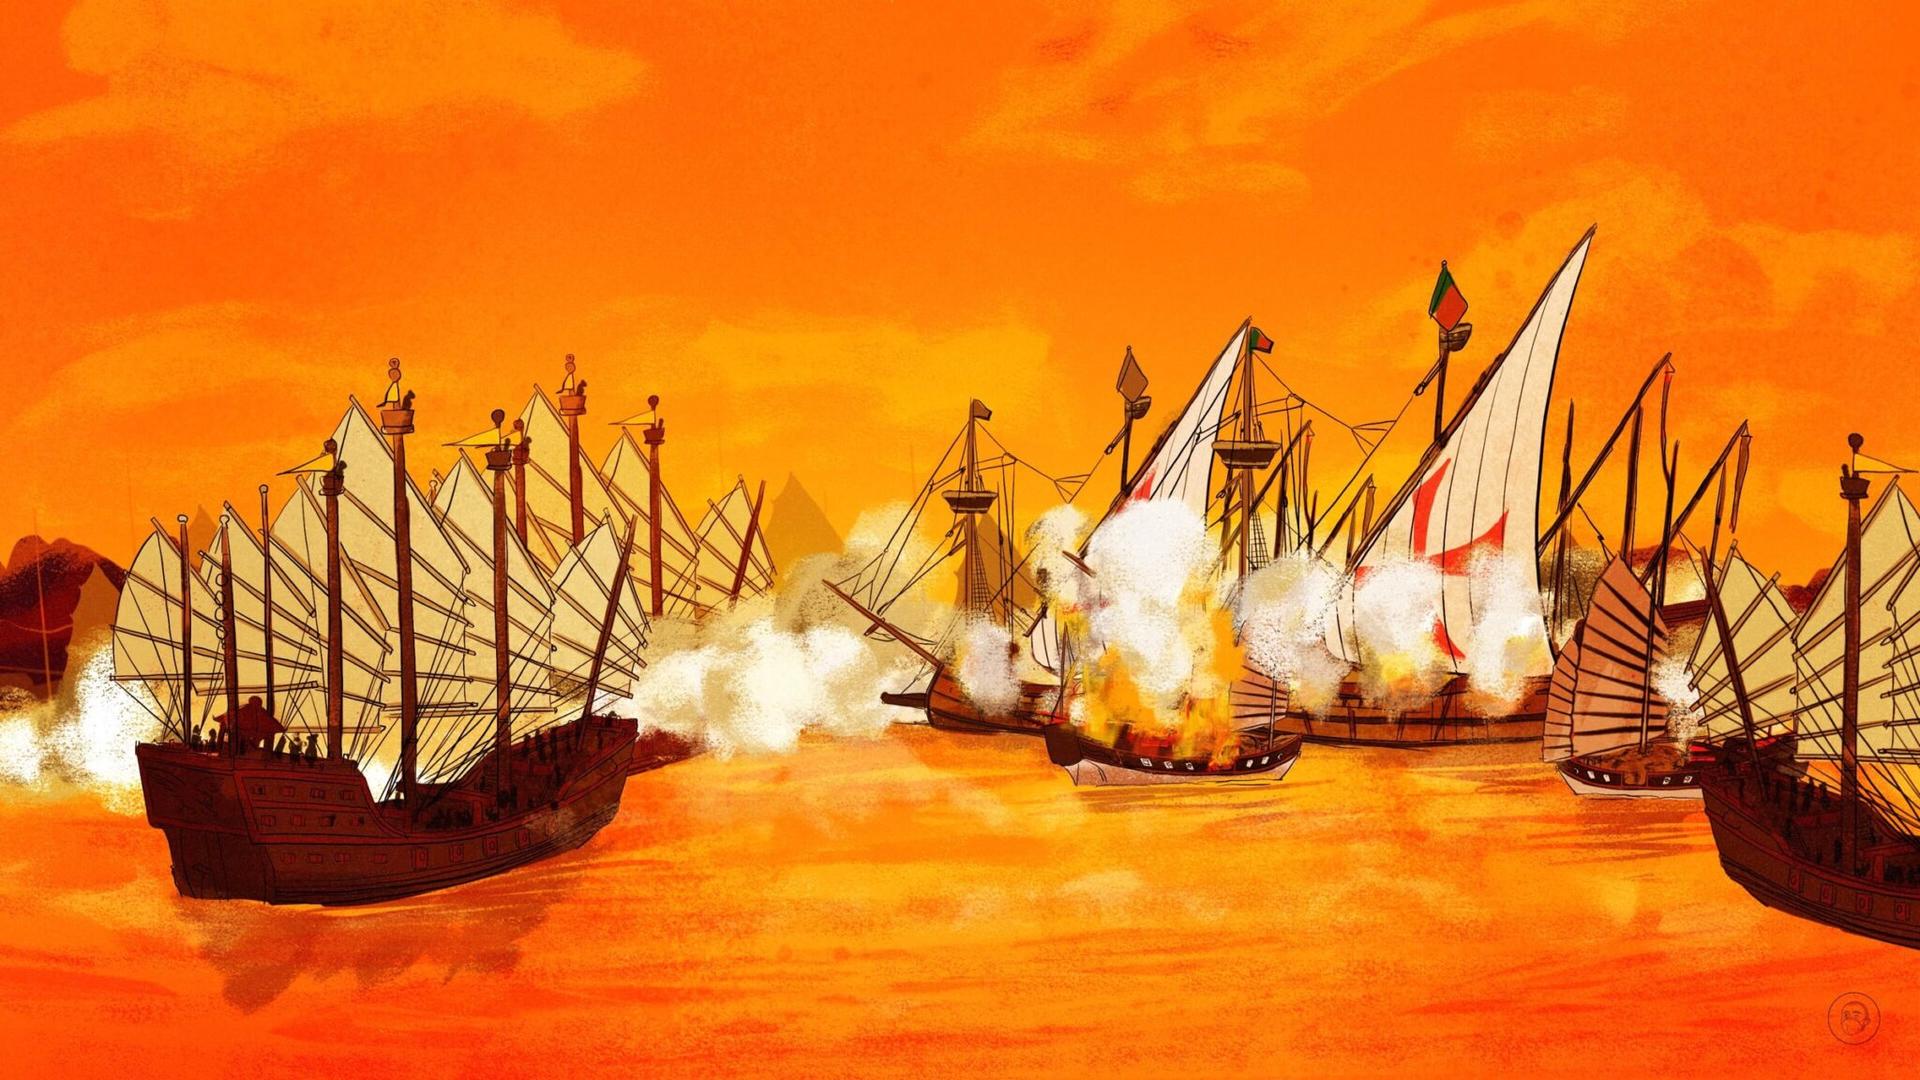 An illustration by Alex Santafe depicting a battle in the Pearl River between Portuguese and Ming Chinese